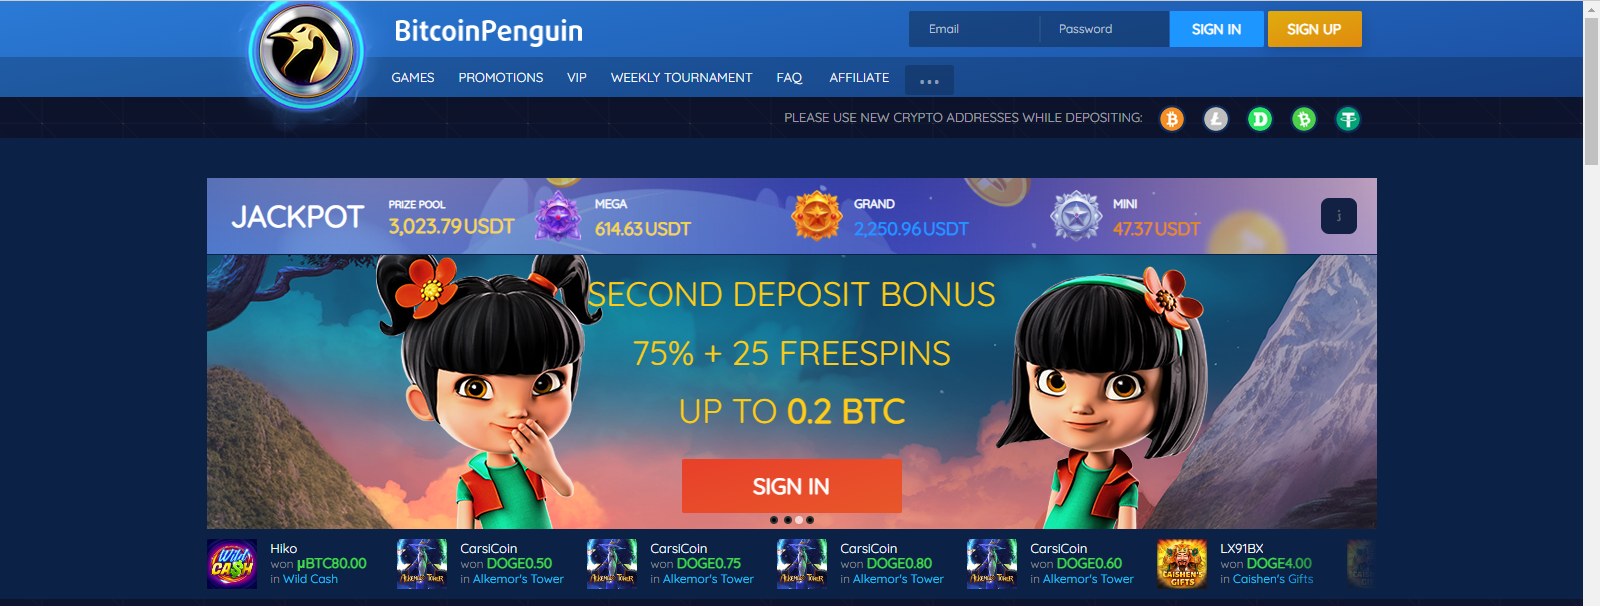 Homepage of BitcoinPenguin Game